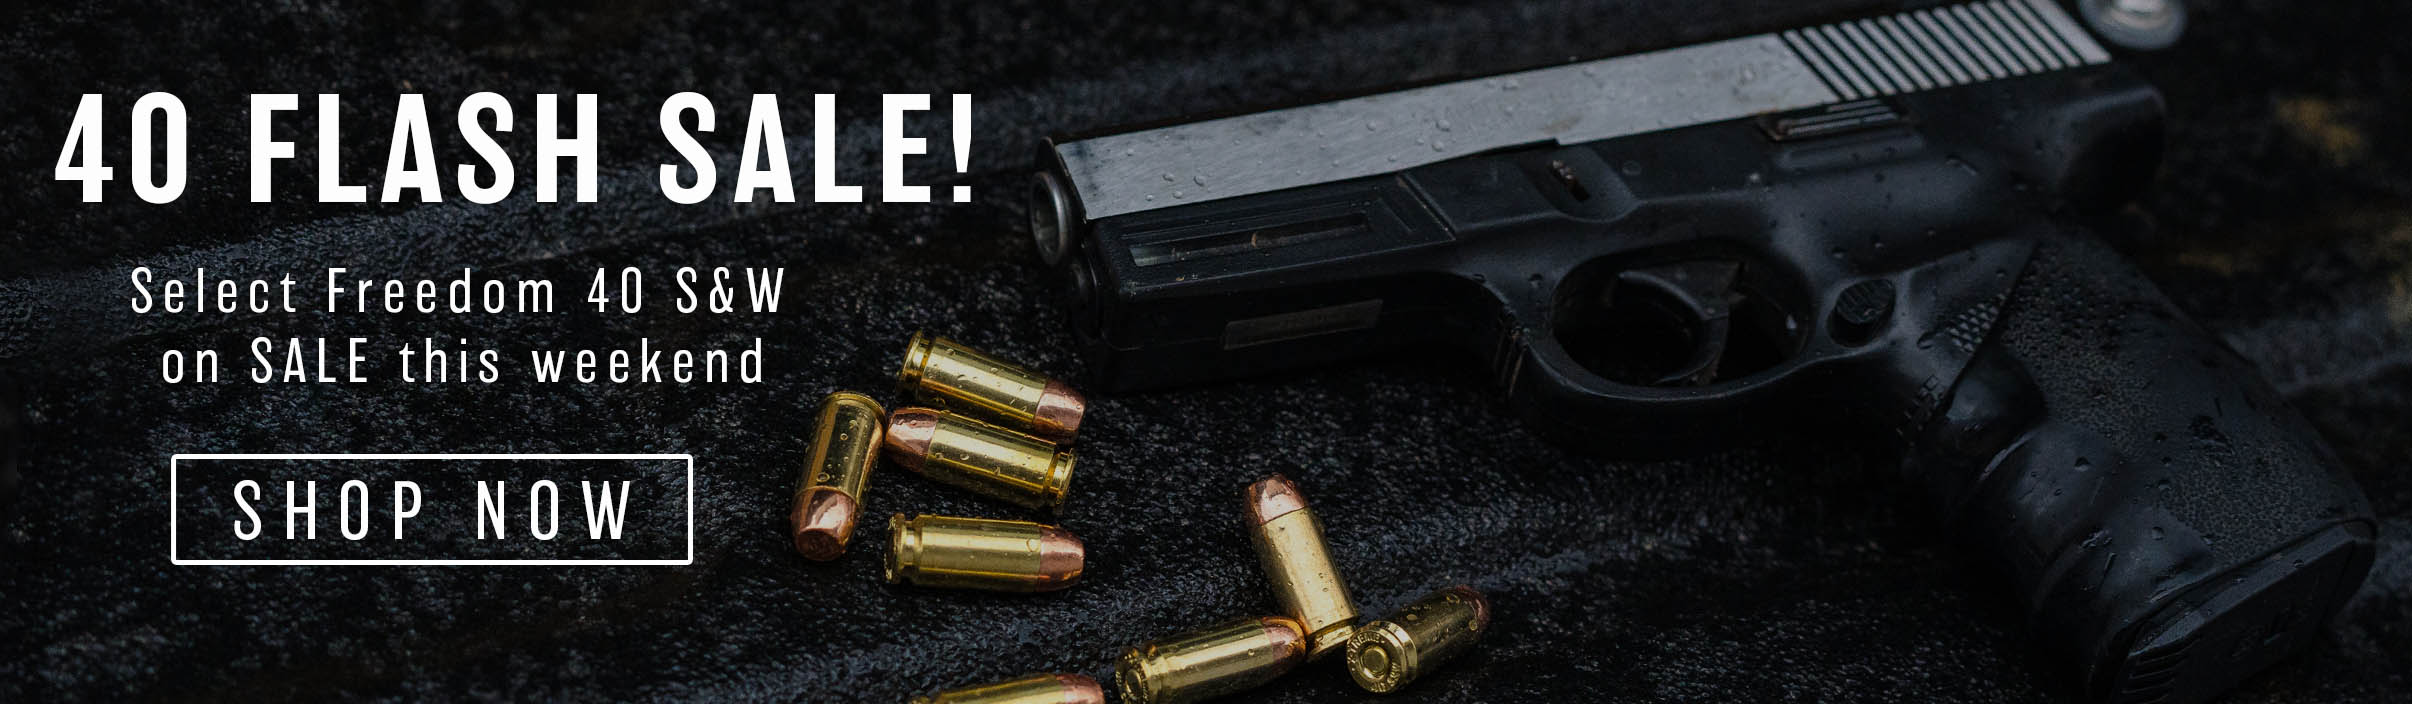 SALE on Select 40 S&W Ammo! 